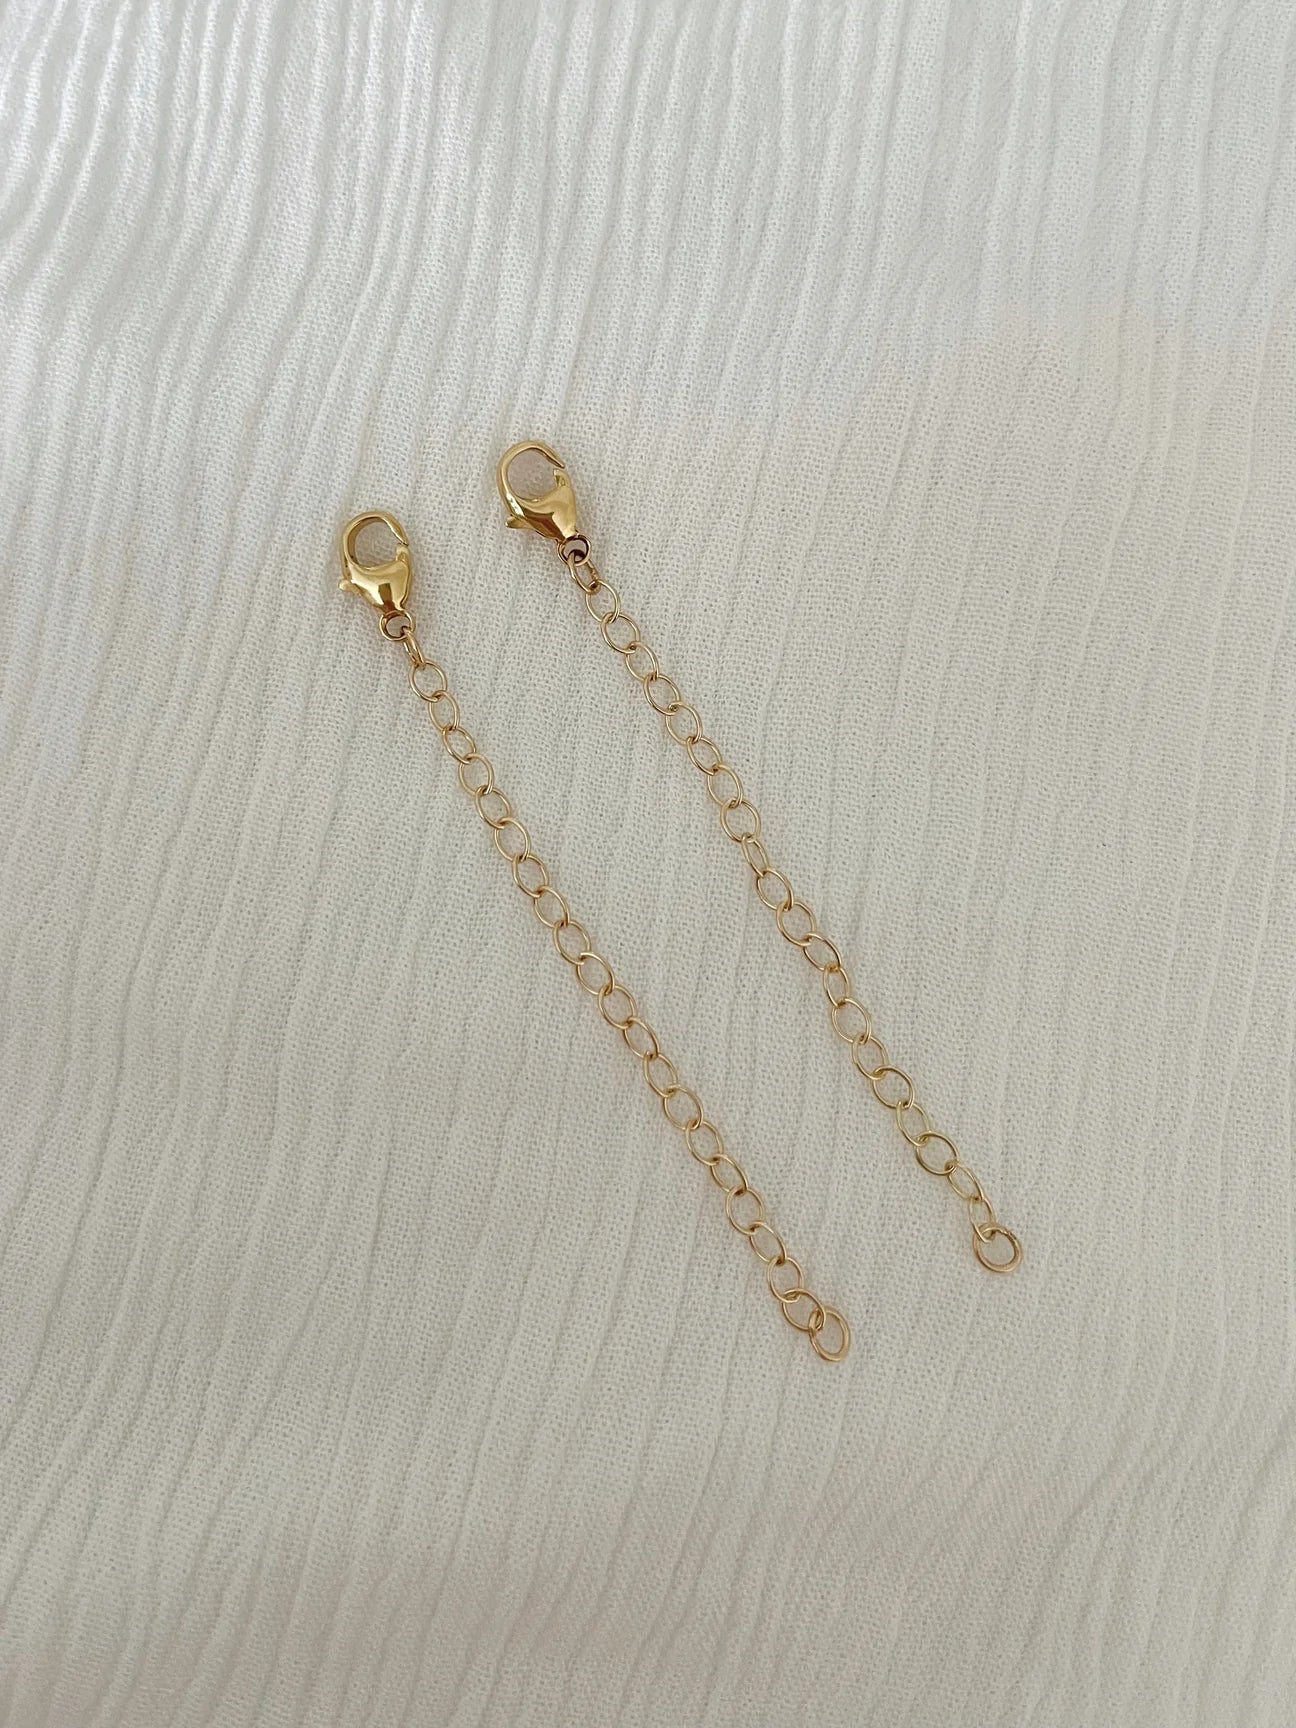 Gold Filled Necklace Extenders